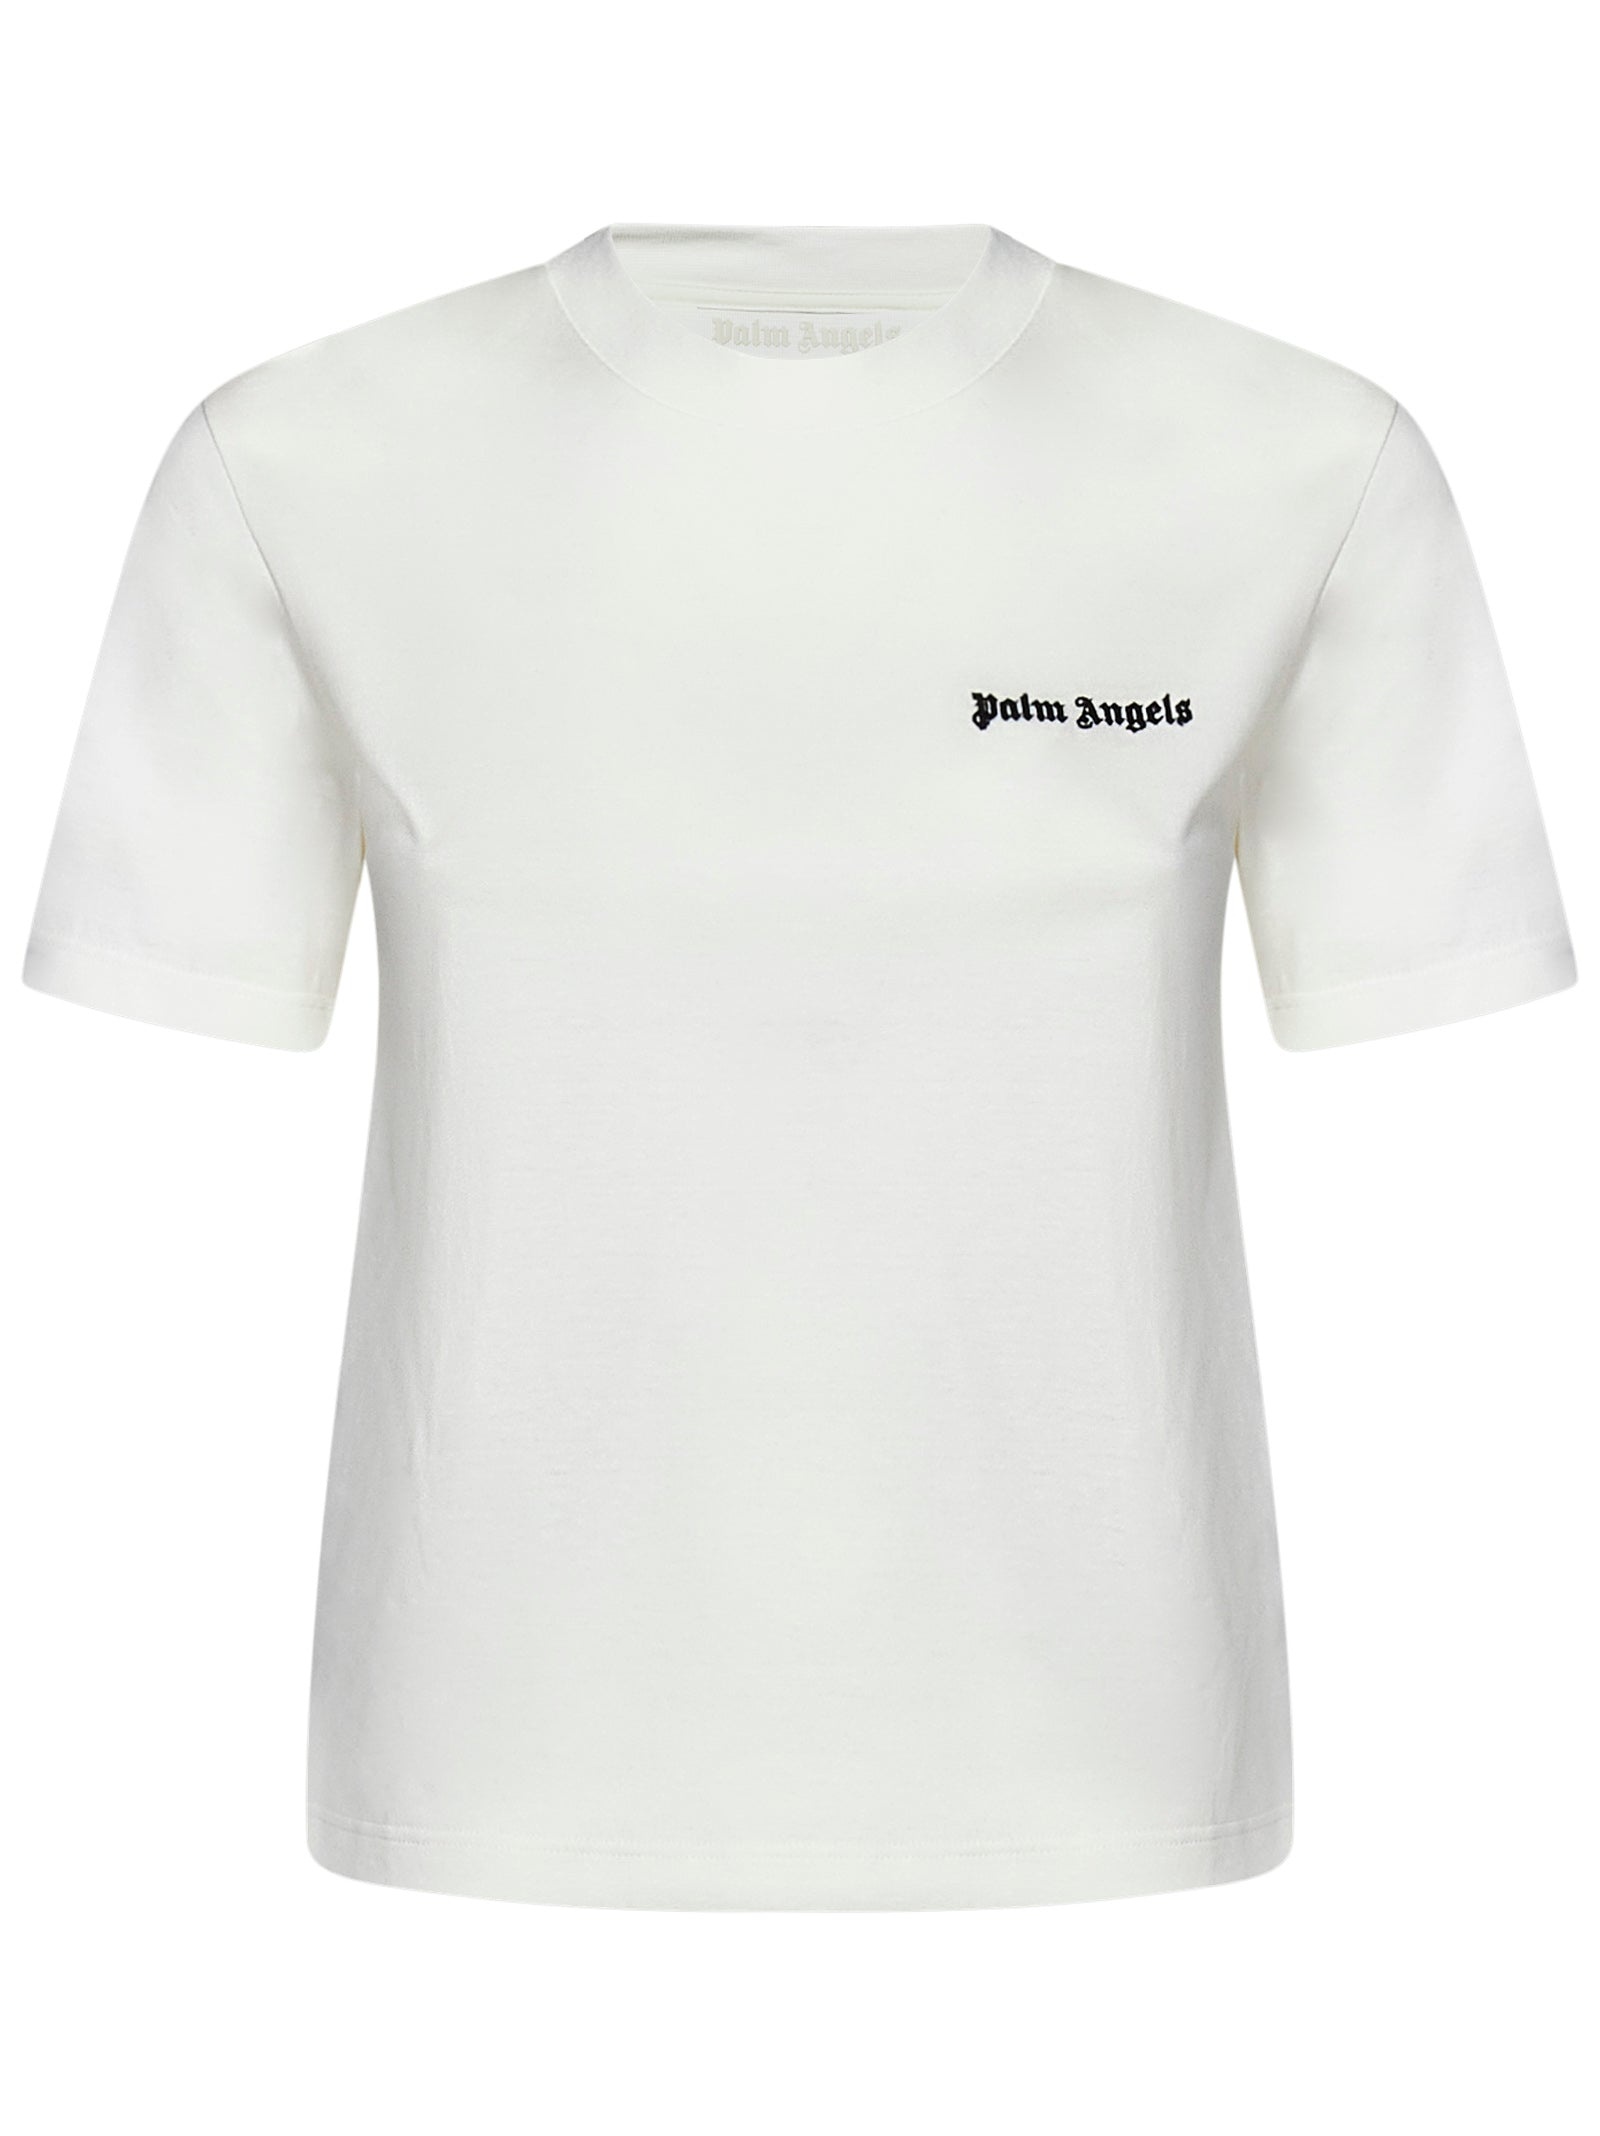 CLASSIC LOGO FITTED PALM ANGELS T-SHIRT - 1